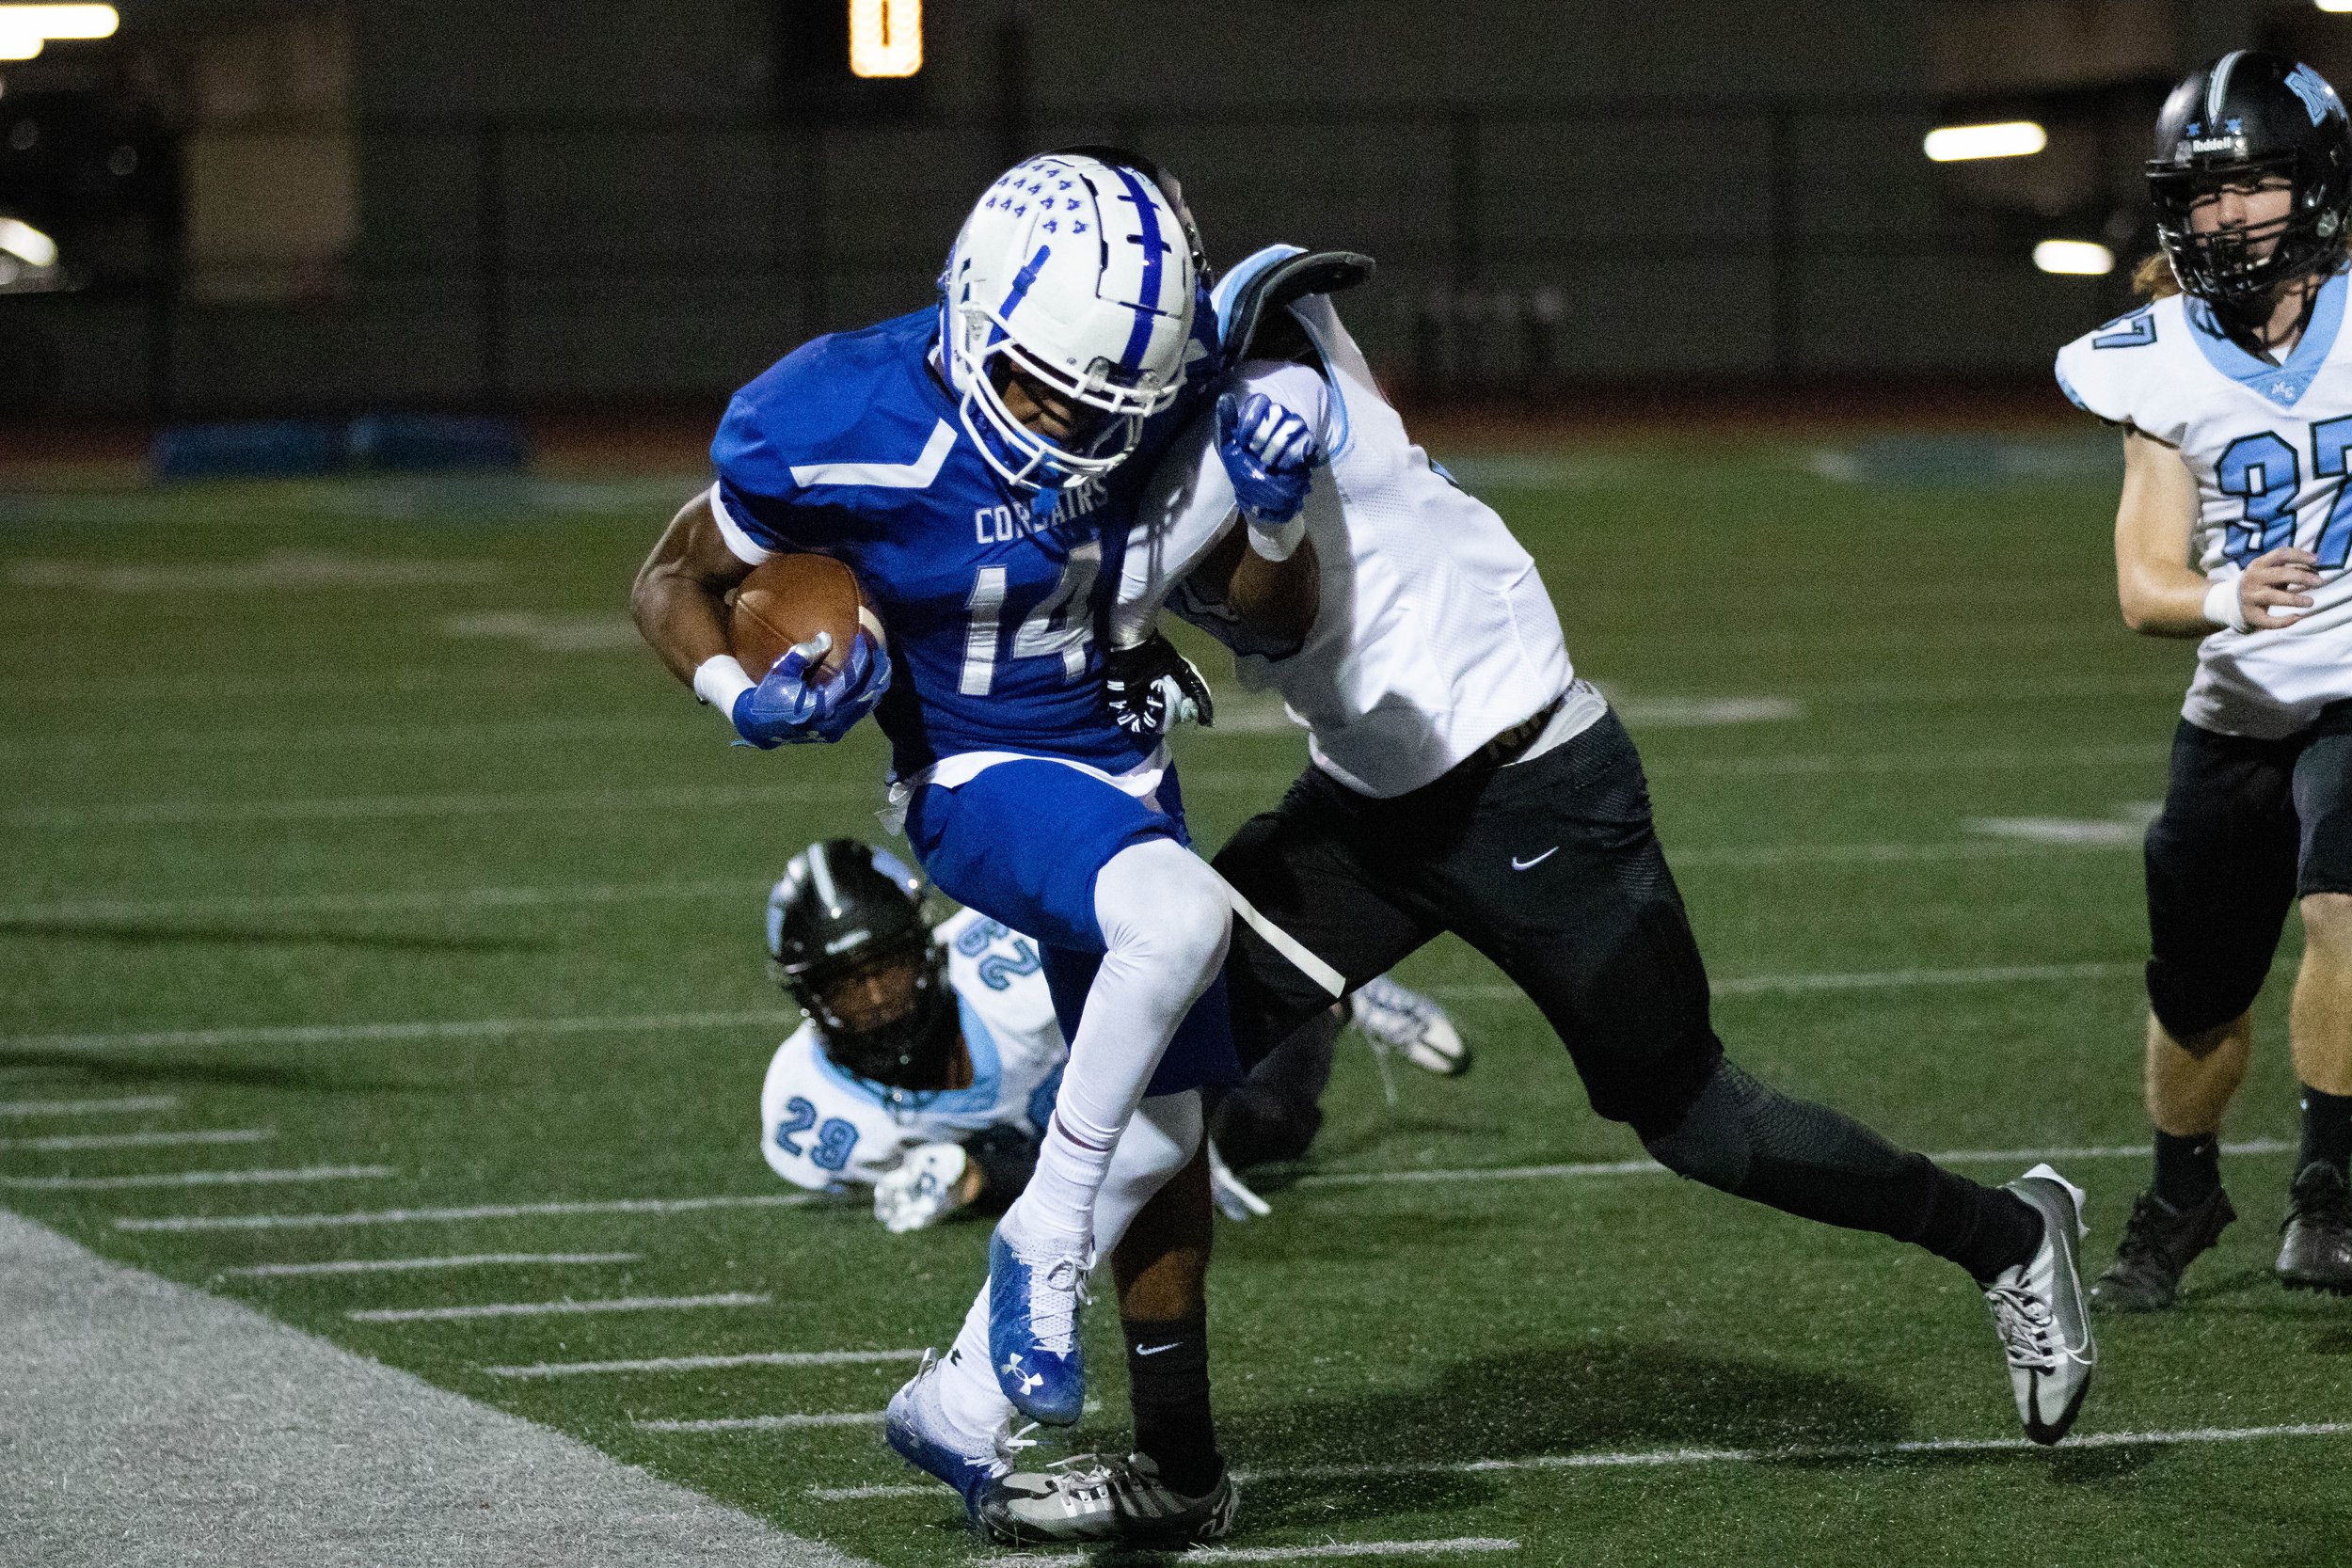  Santa Monica College Corsair wide receiver Jaboree Thornton (14, left) being tackled by Moorpark College Raider wide receiver Khalil Collins (89, middle left) during the fourth quarter of a recent home game on Thursday, Oct. 13, 2022, at Santa Monic